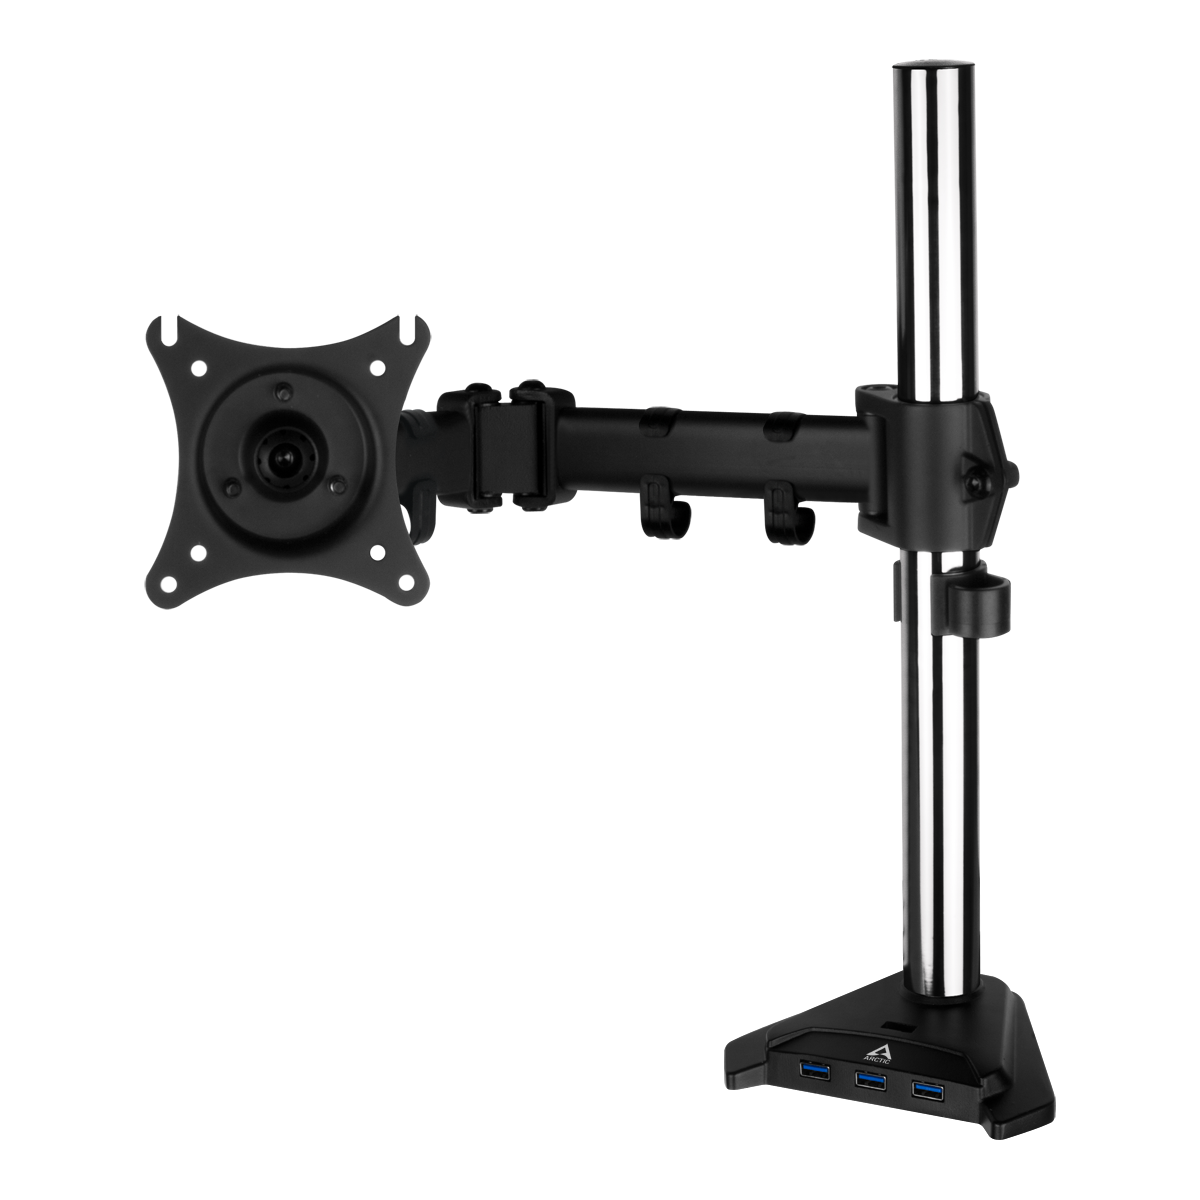 Desk Mount Monitor Arm with SuperSpeed USB Hub ARCTIC Z1 Pro (Gen 3)